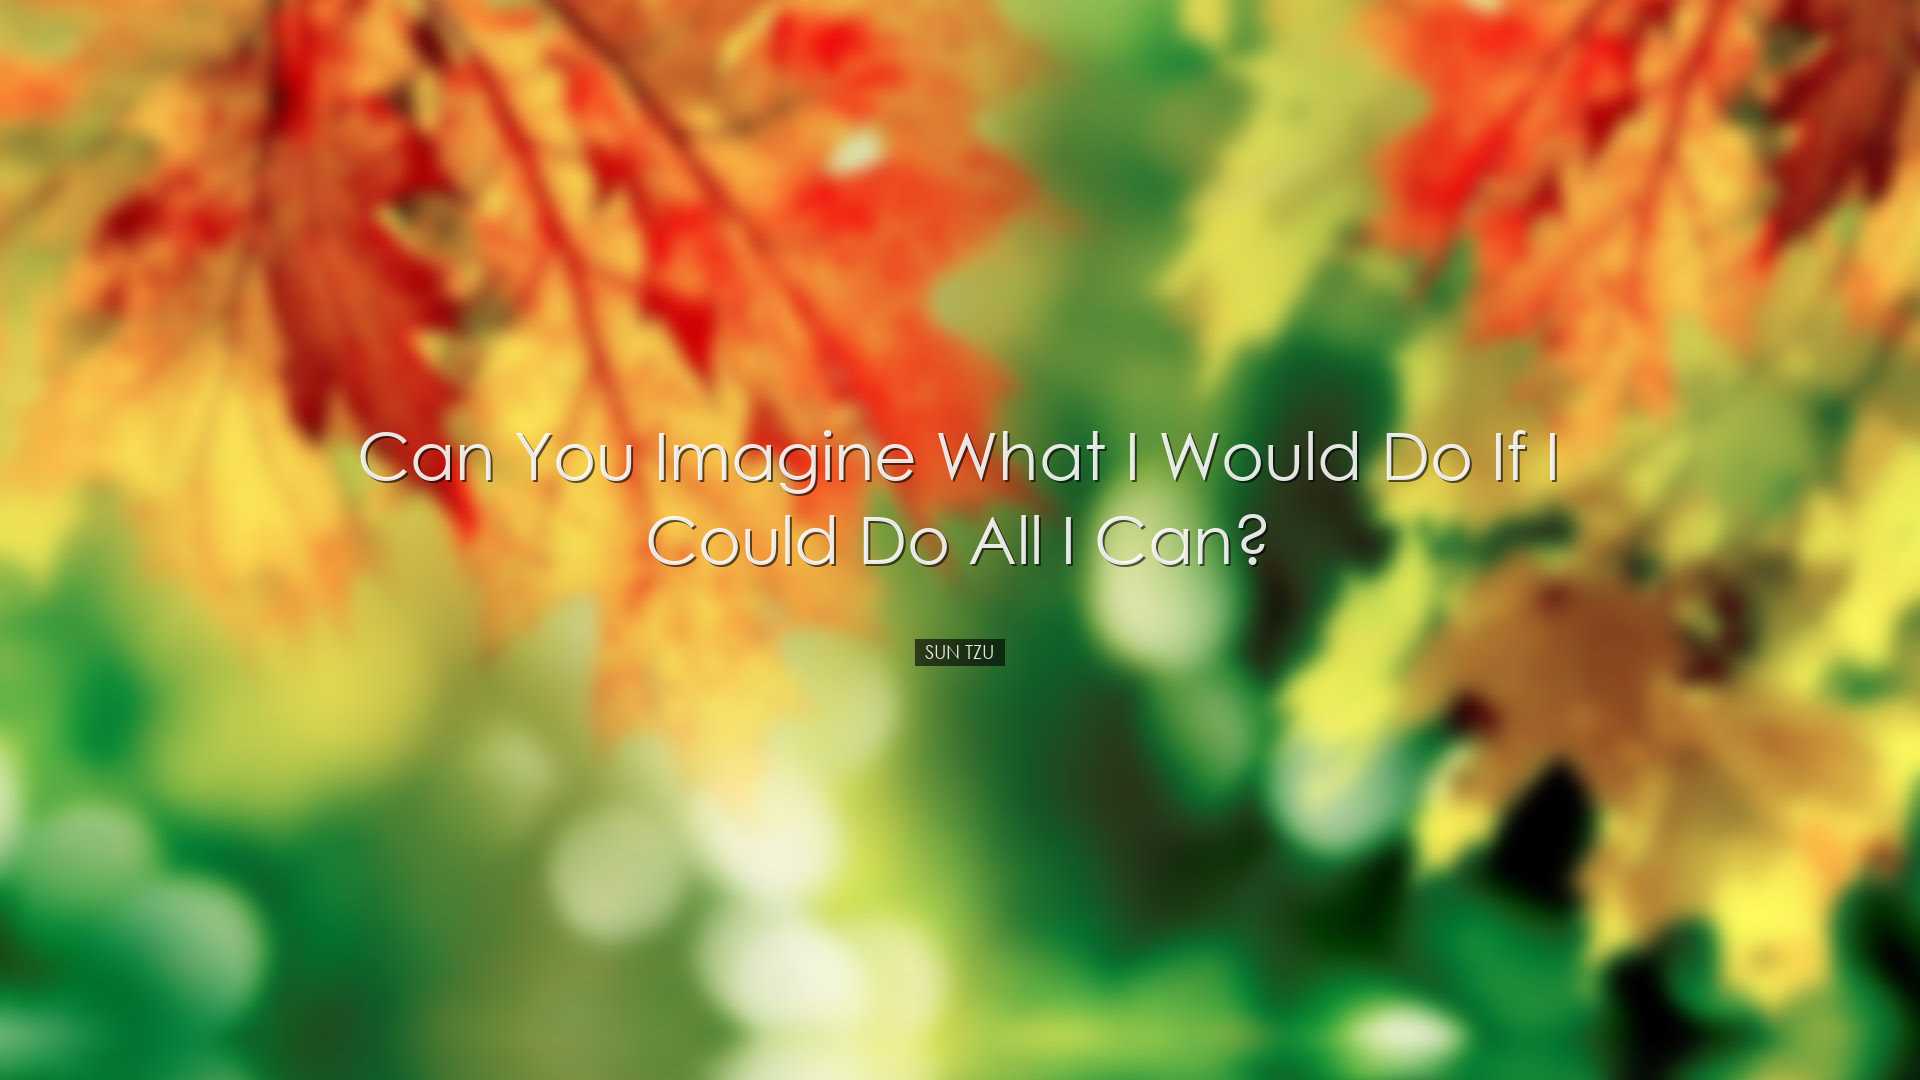 Can you imagine what I would do if I could do all I can? - Sun Tzu